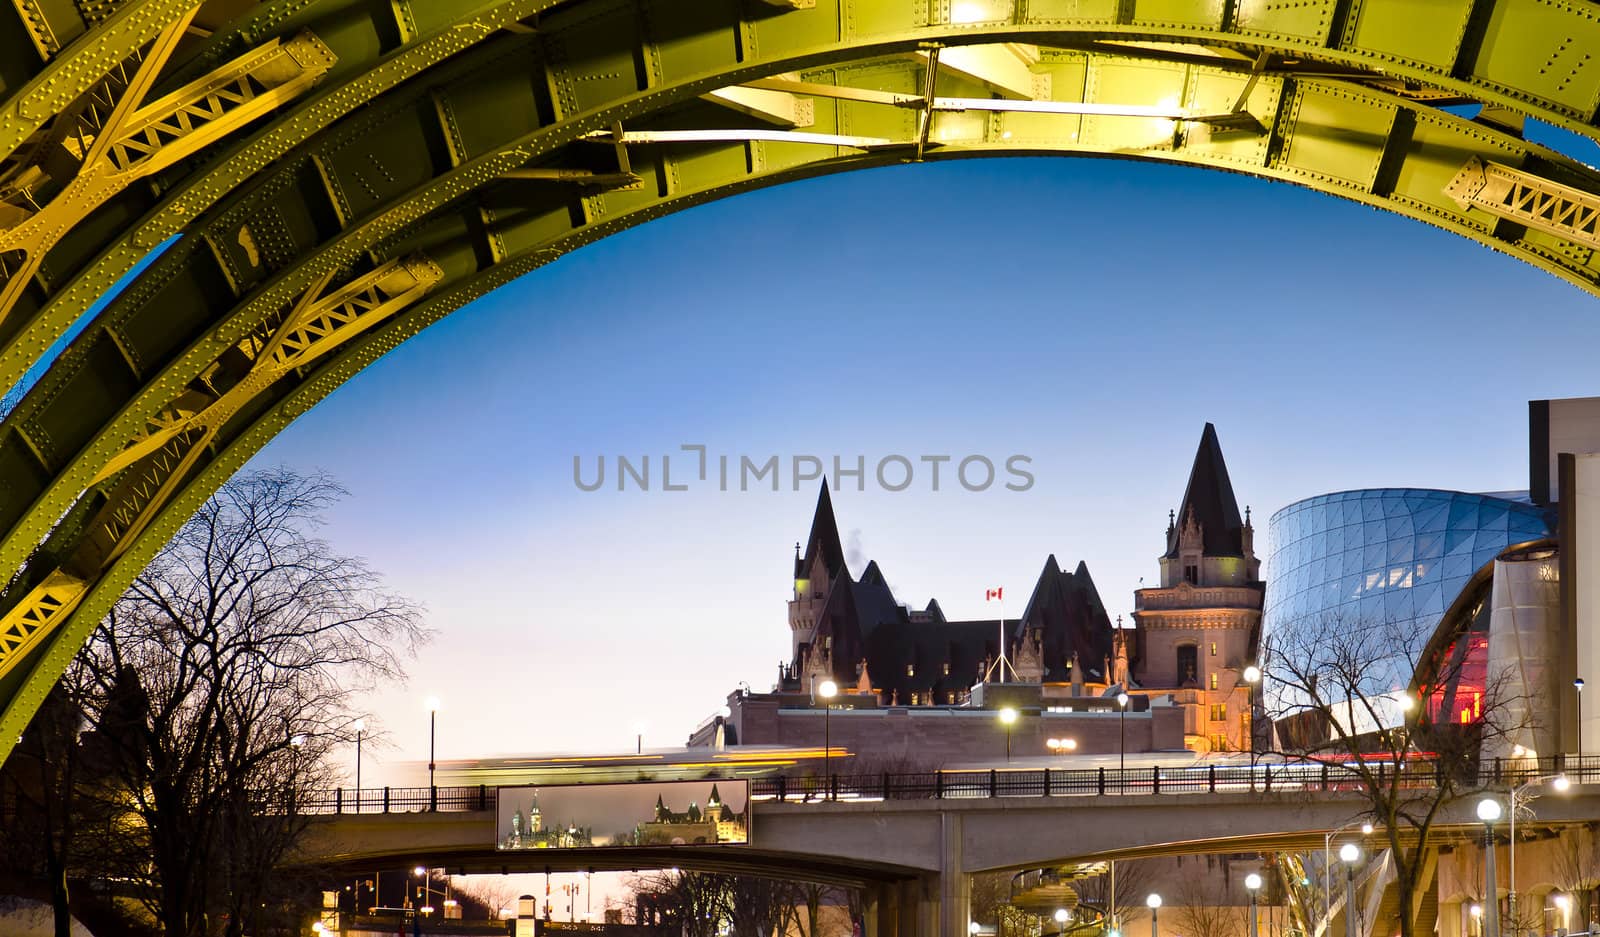 The Fairmont Chateau Laurier Hotel seen from under the Laurier Street bridge in Ottawa